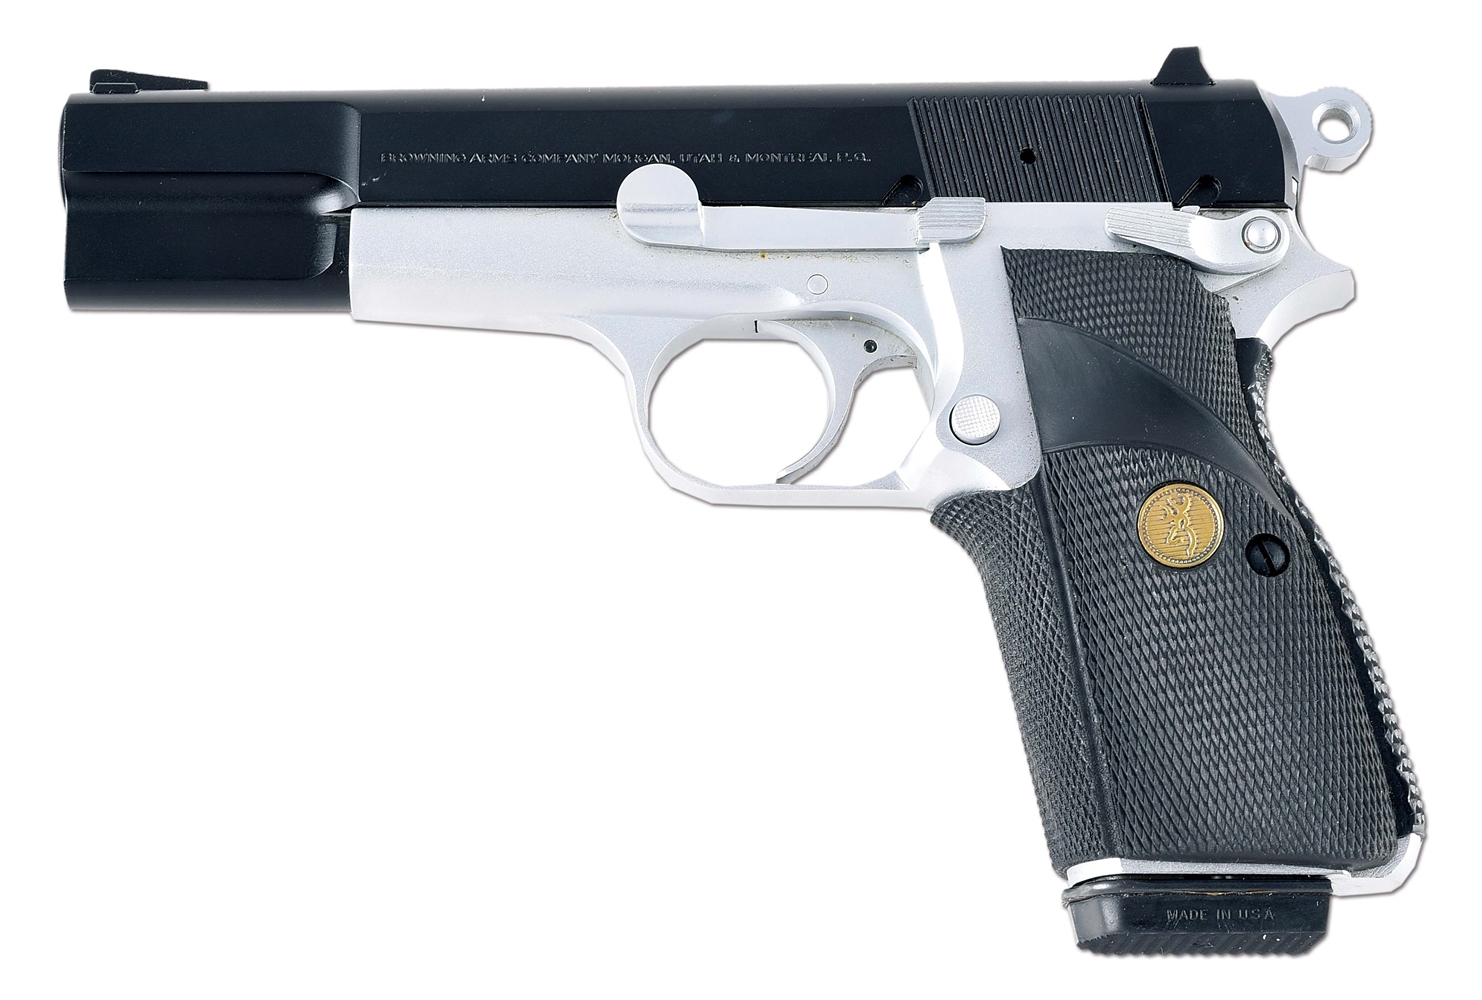 (M) BROWNING HI-POWER SEMI AUTOMATIC PISTOL WITH CASE.